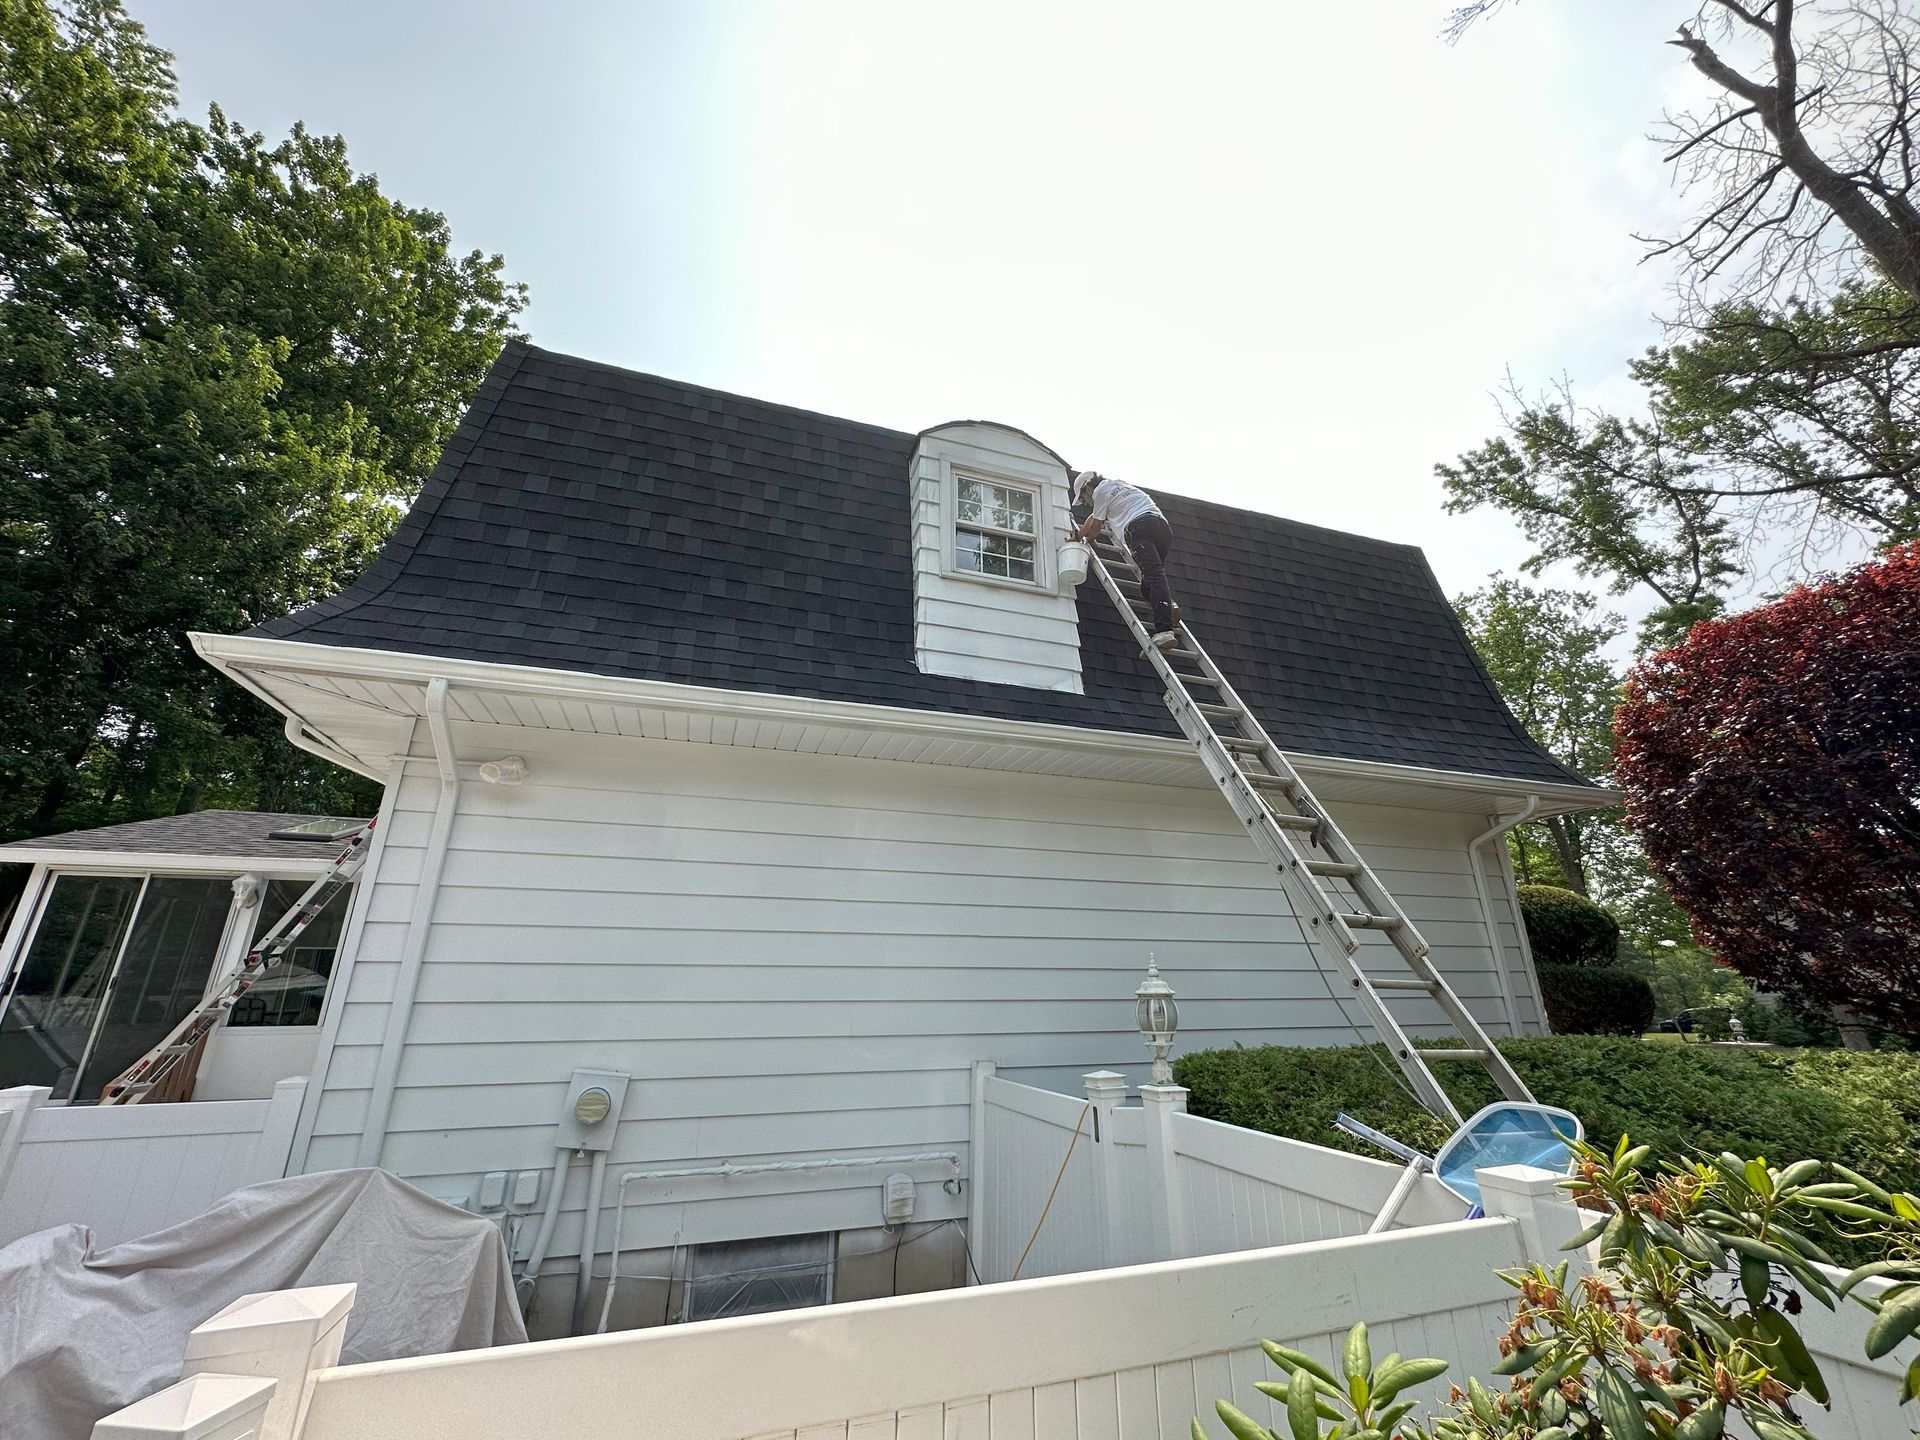 Commercial Painting in New Jersey